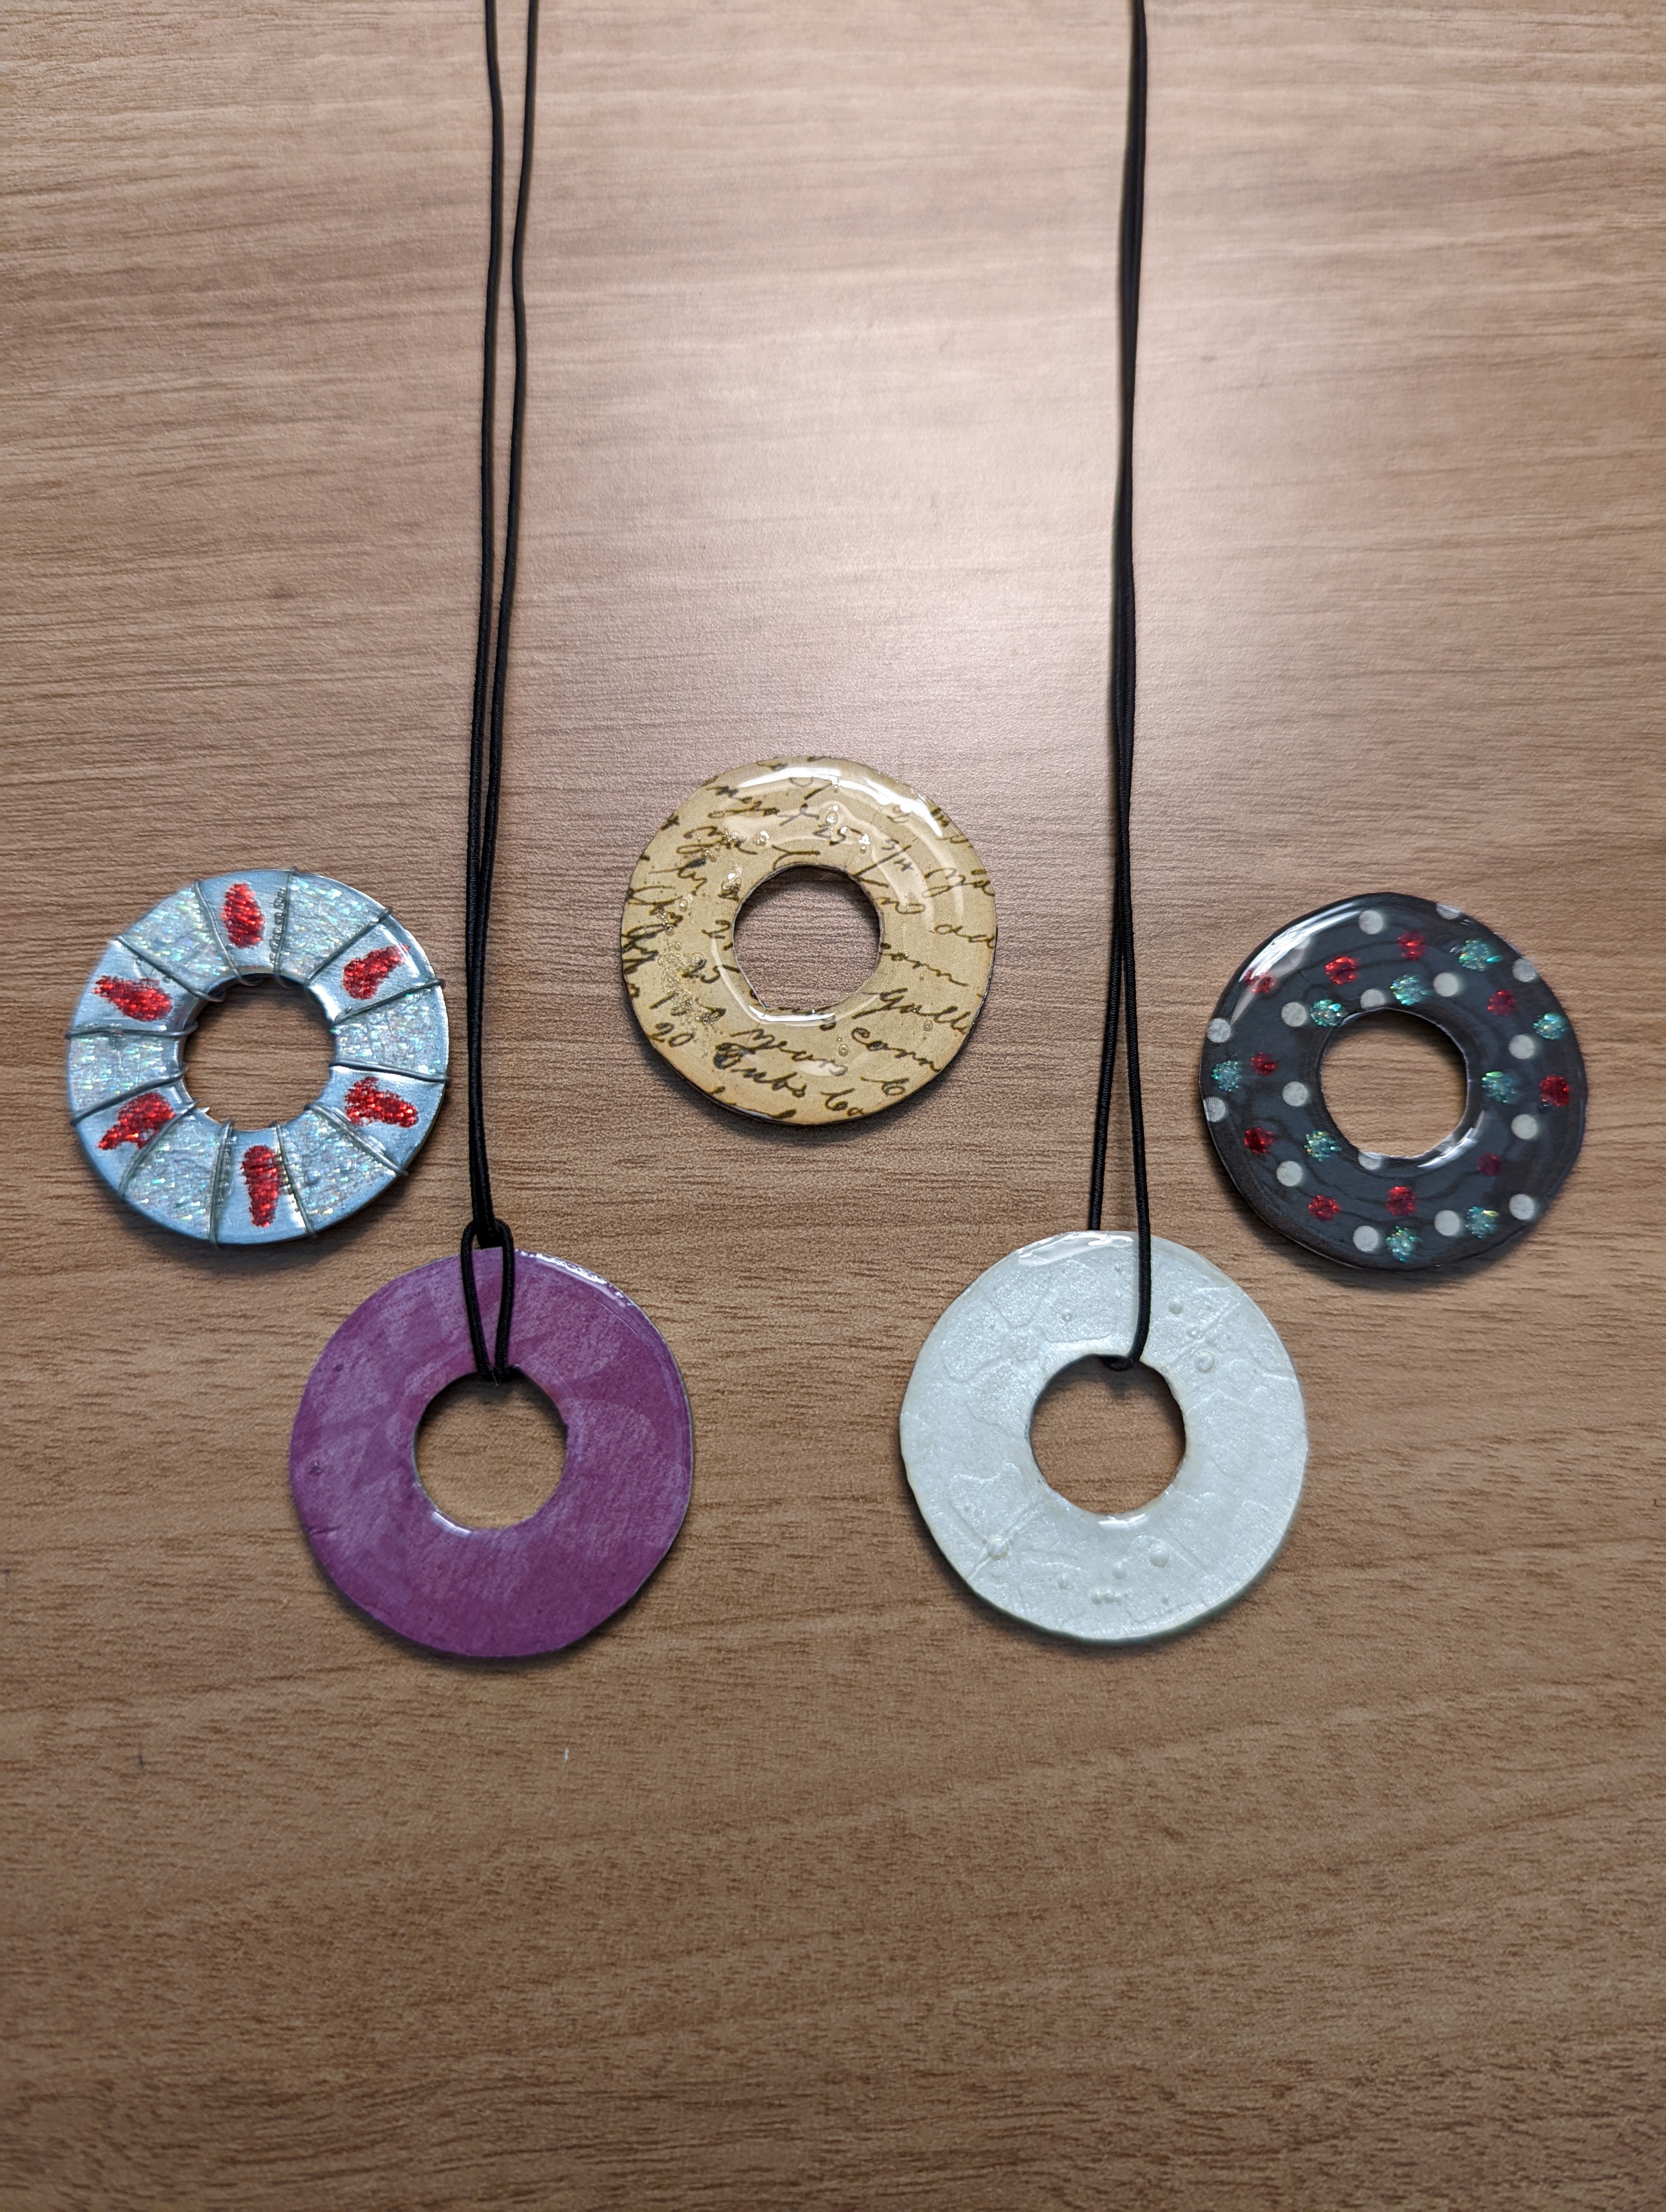 Five pendants made out of washers, two of them on necklace cords.